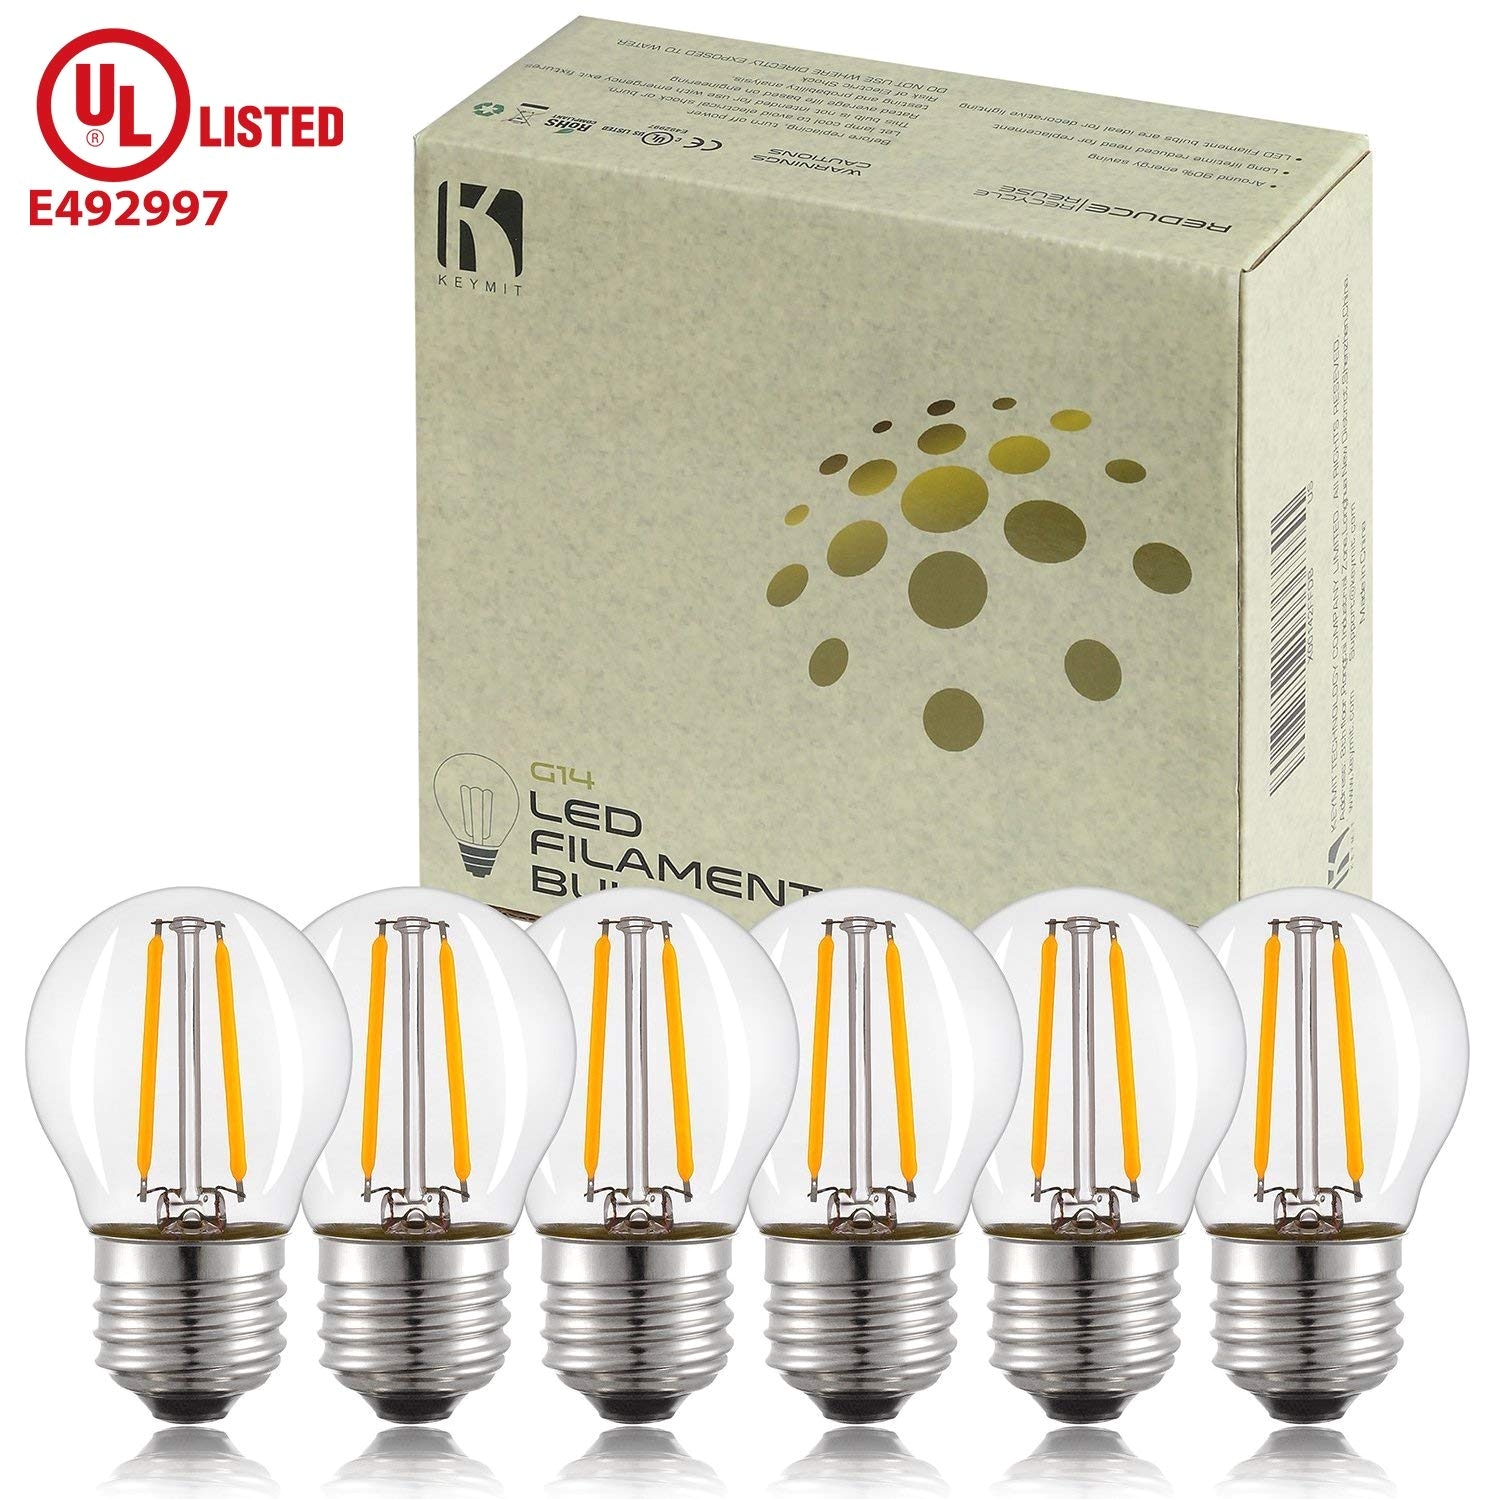 keymit e26 medium base g14 2w 200lm led small globe bulb 1 77 by 3 07 in not a19 dimmable 6pack amazon com